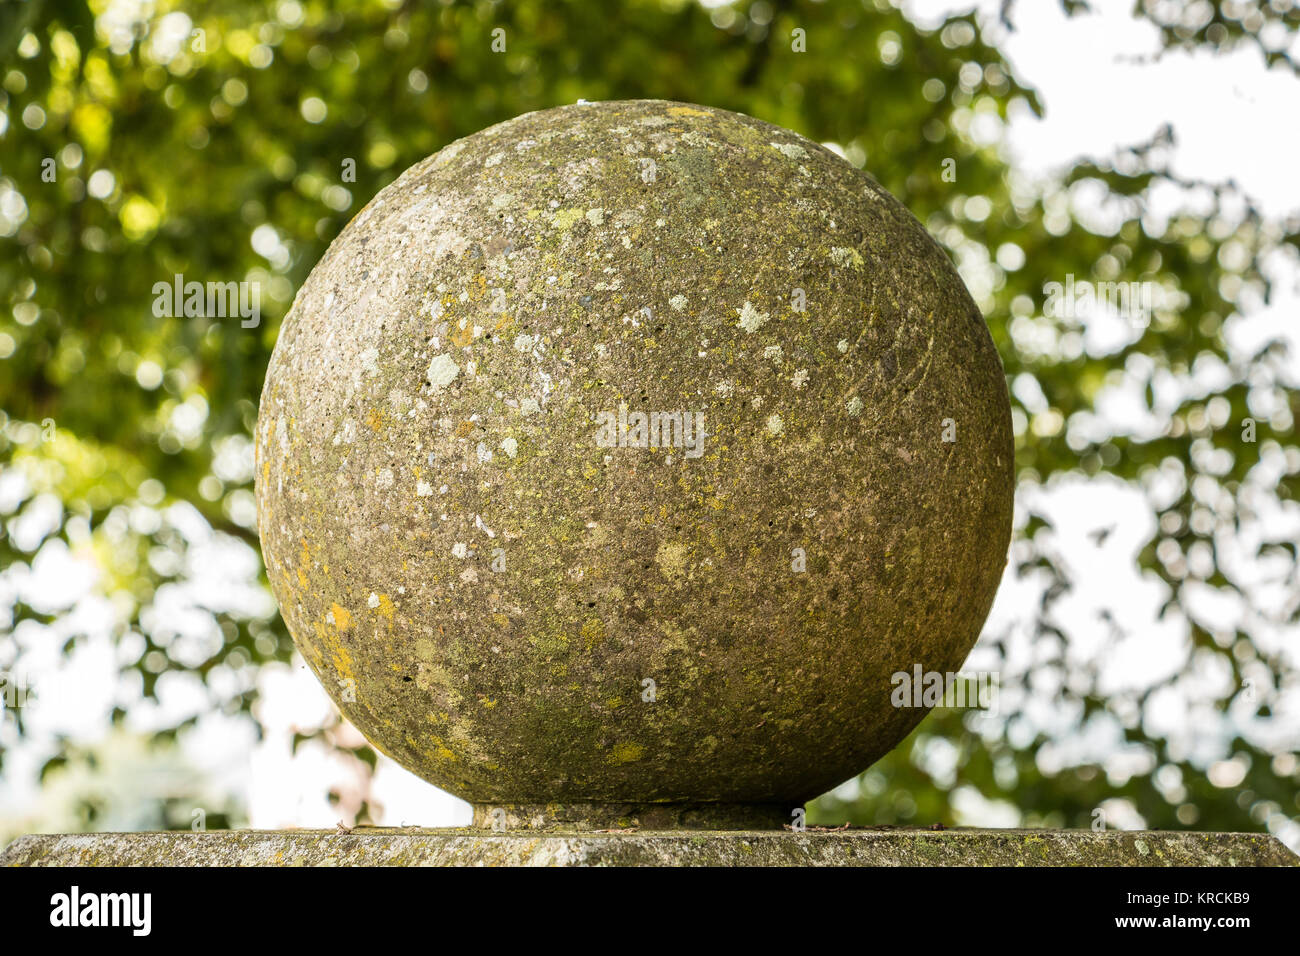 Big stone ball and green leaves in the park Stock Photo